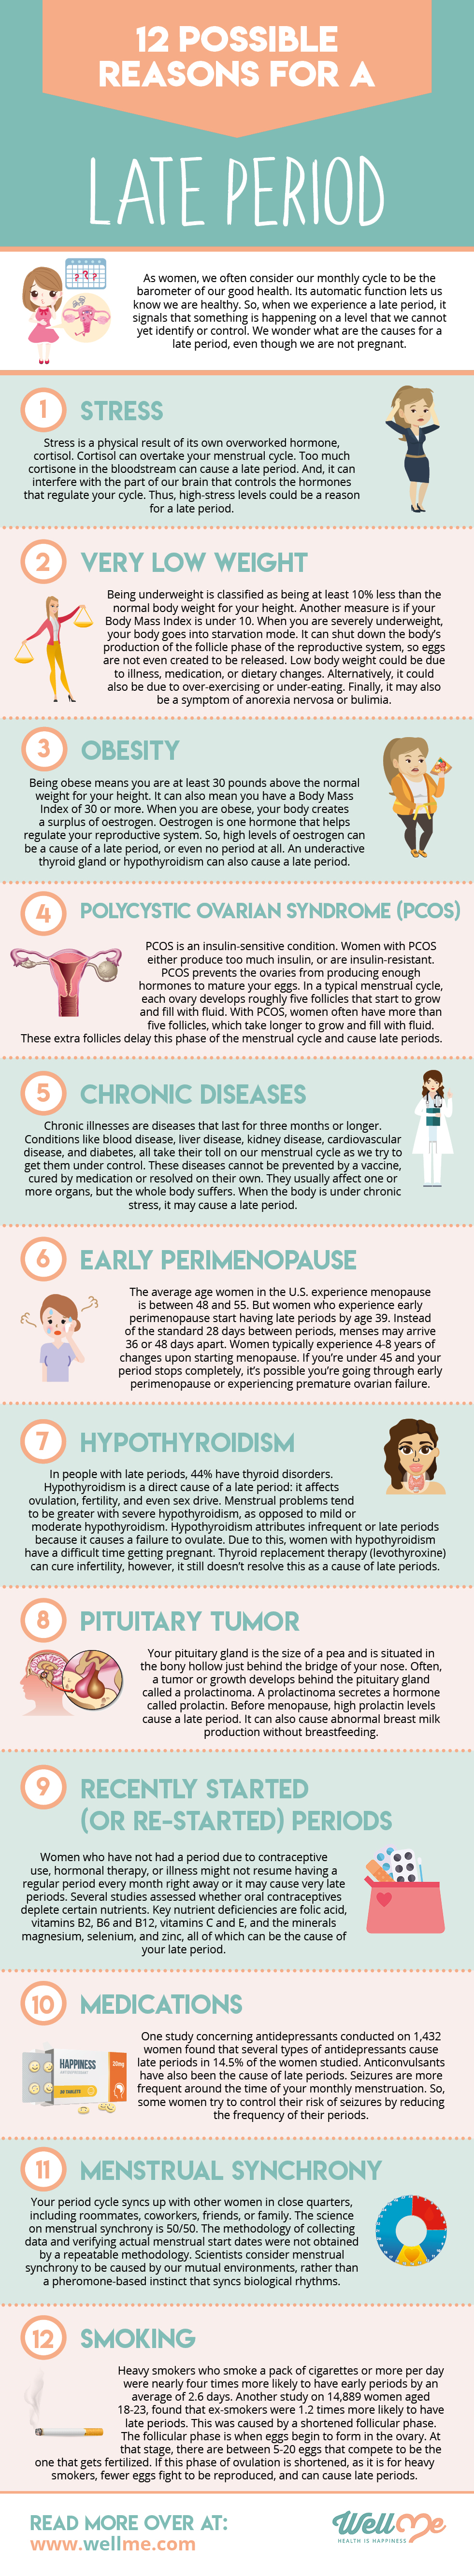 12 Non-Pregnancy Reasons For a Late Period infographic